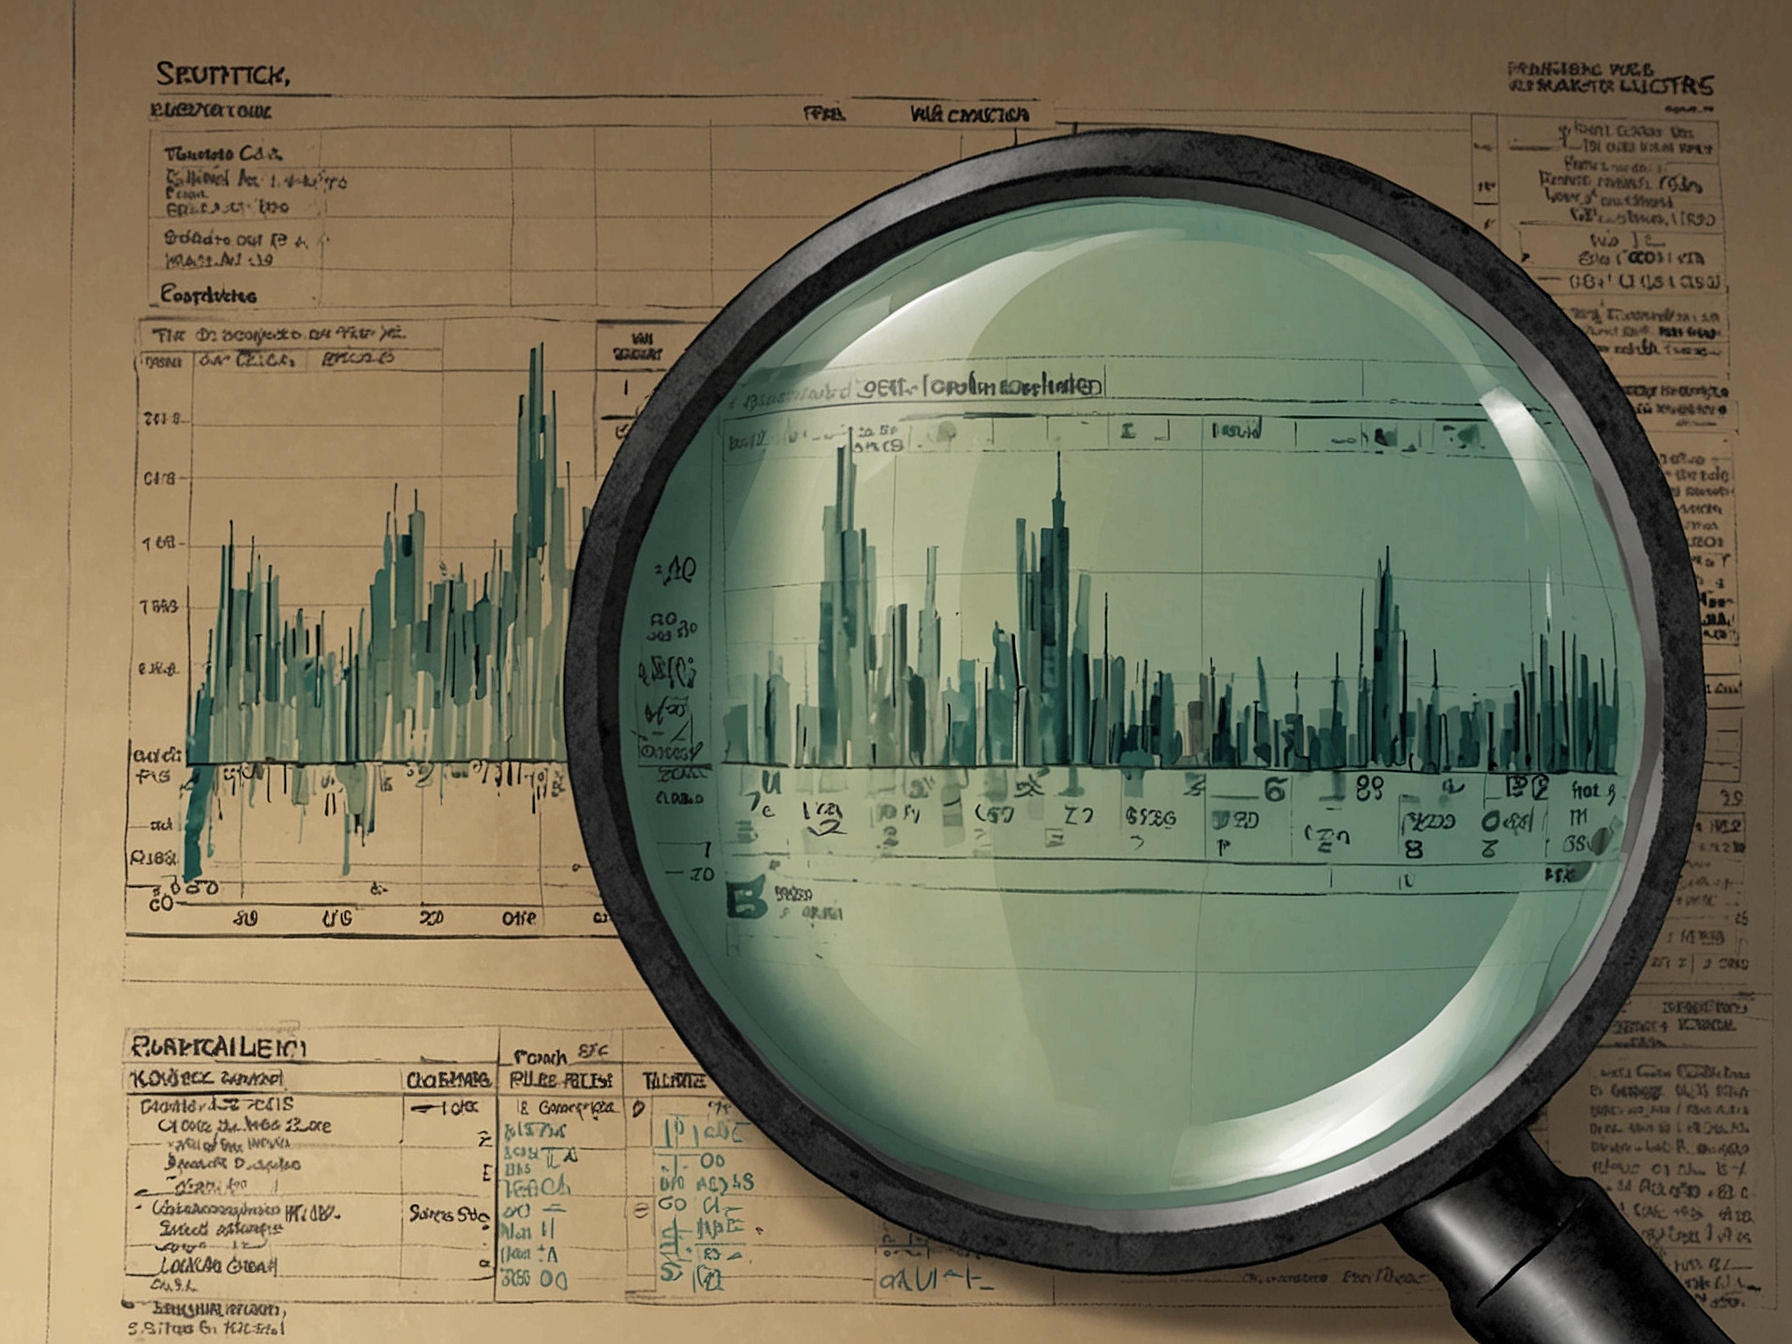 A magnifying glass over financial statements representing the scrutiny needed to look beyond the buzz and hype surrounding overhyped stocks like Company A, B, and C.